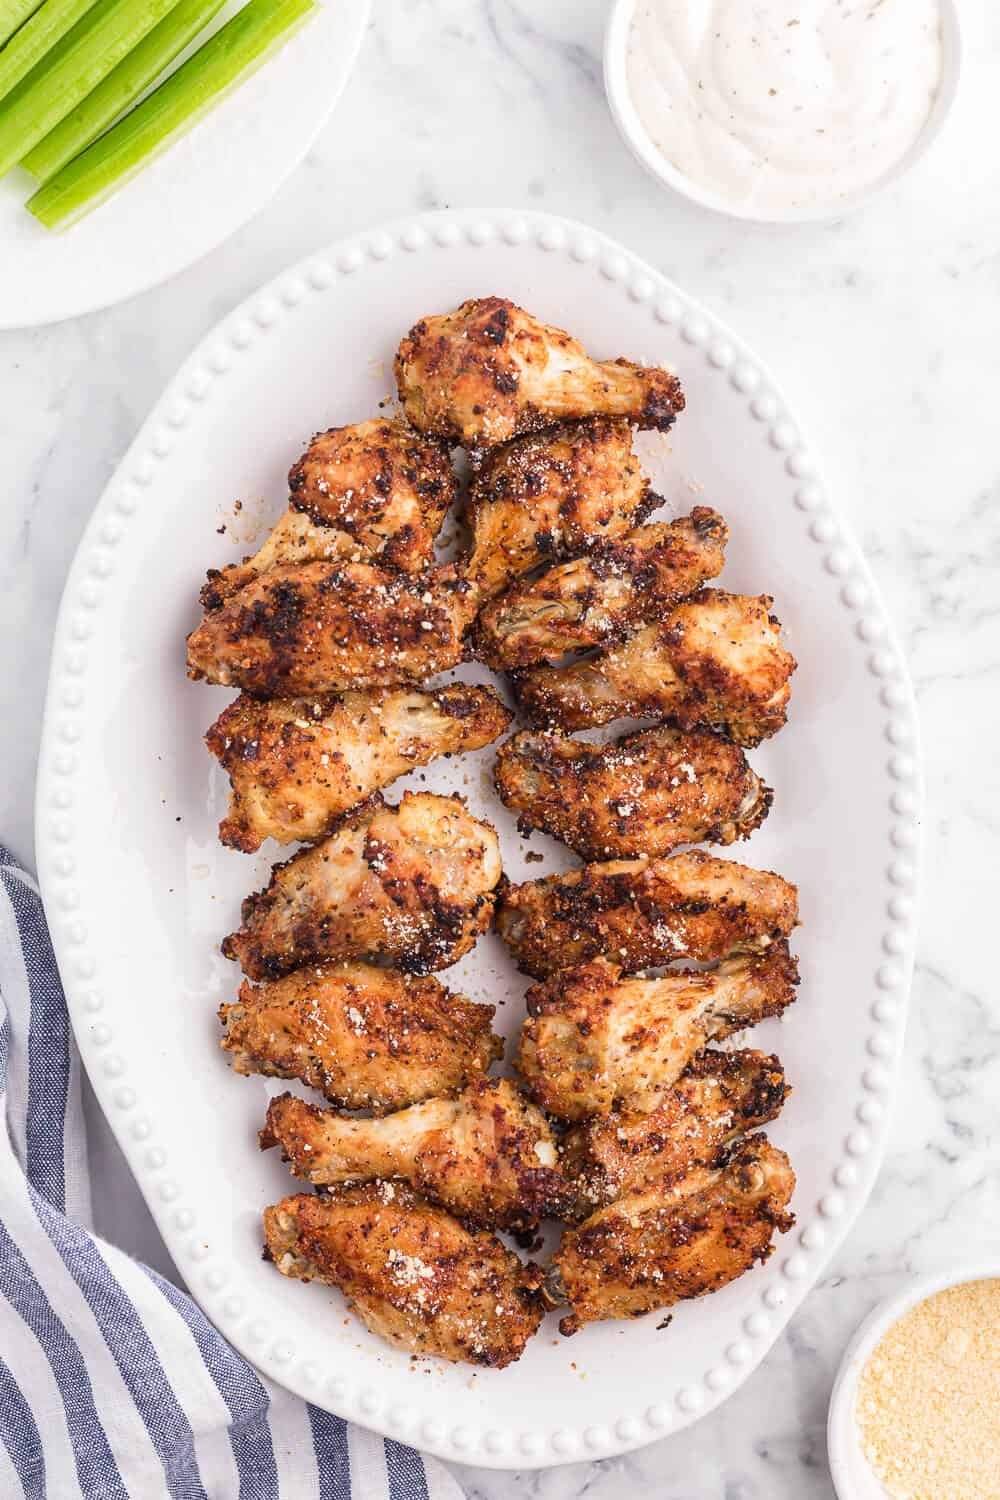 Air Fryer Chicken Wings Recipe - Use your air fryer to make the best crispy chicken wings in minutes! This easy appetizer is covered in a garlic, lemon pepper and Parmesan marinade for the most delicious flavor.